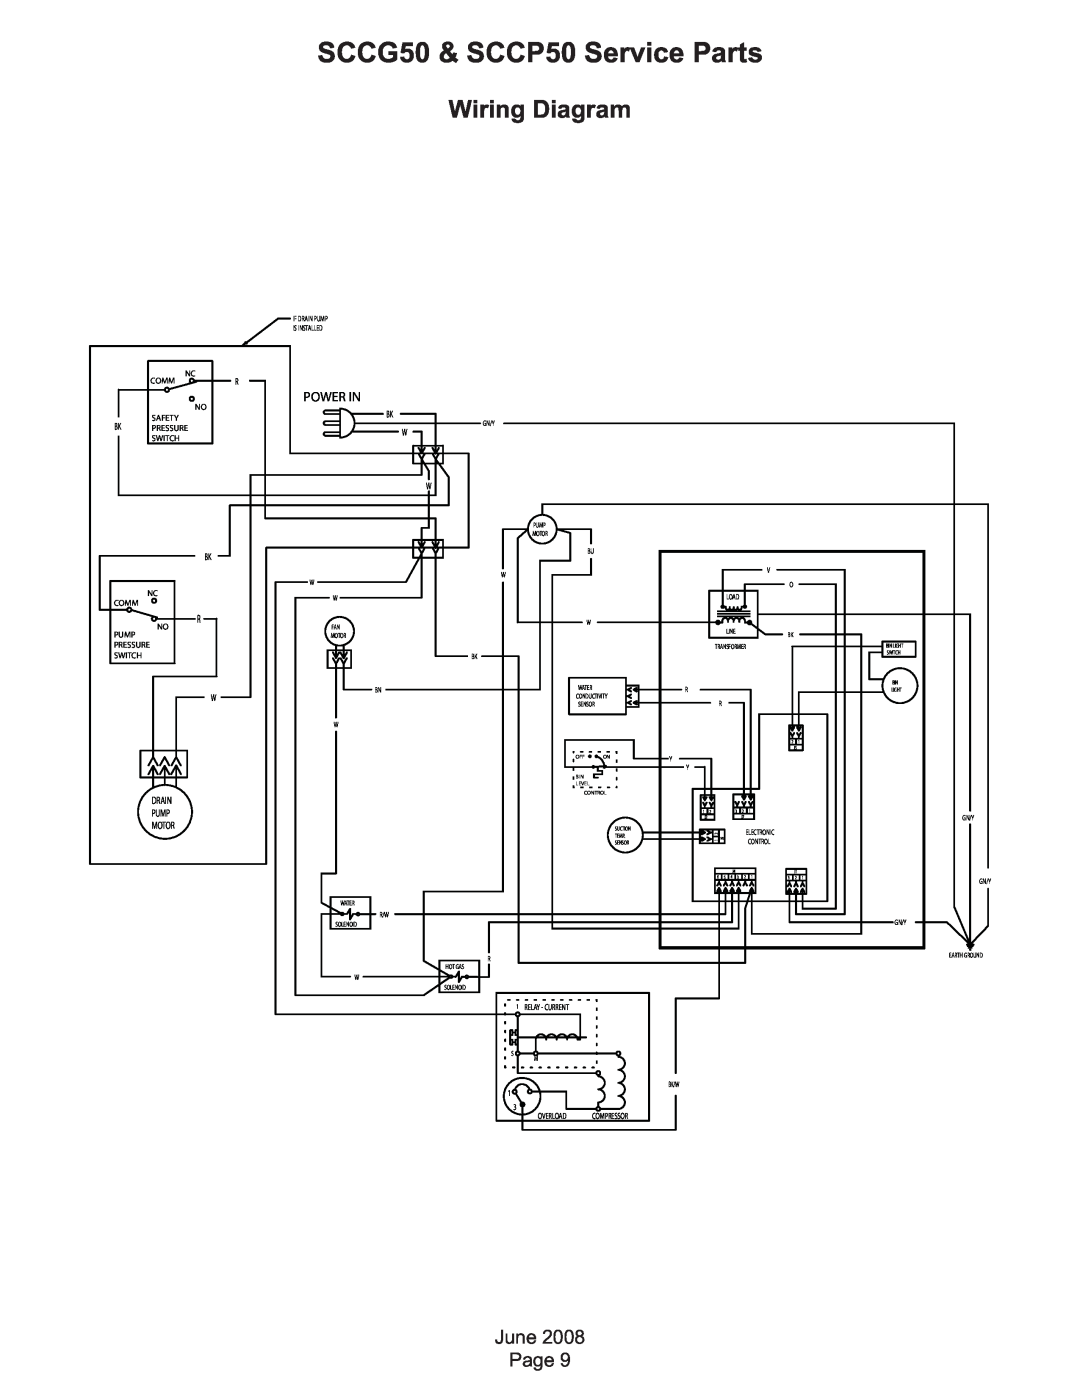 Scotsman Ice SCC50 manual Wiring Diagram, SCCG50 & SCCP50 Service Parts, Power In, Drain, Pump, Motor, Relay - Current 